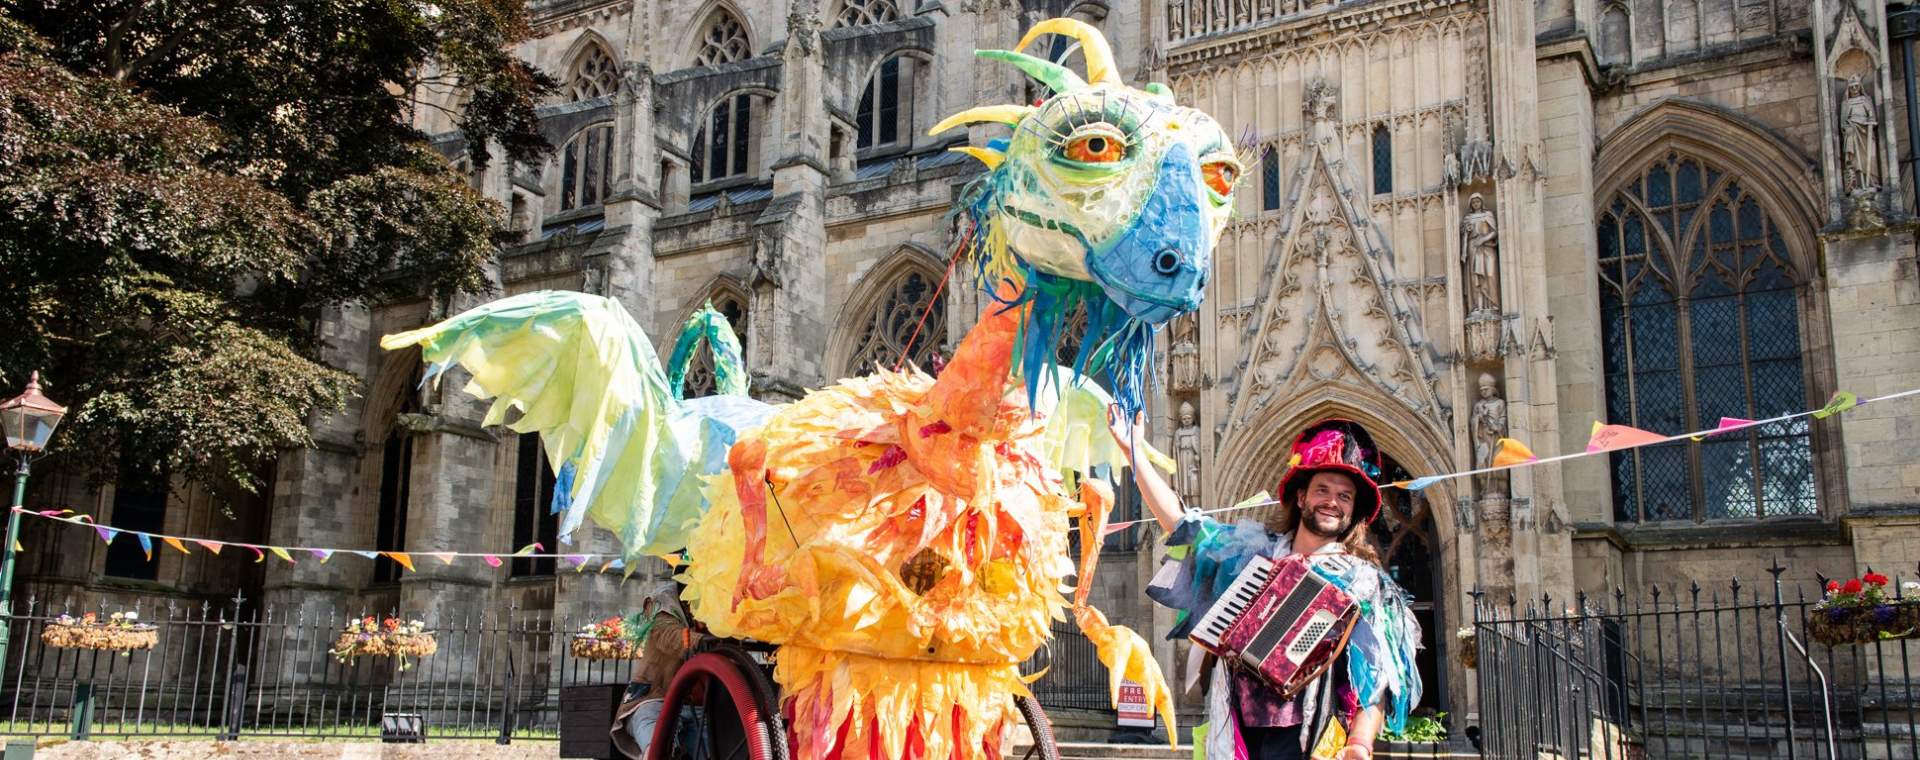 A giant puppet of a dragon next to a man playing an accordion in front of Beverley Minster in East Yorkshire